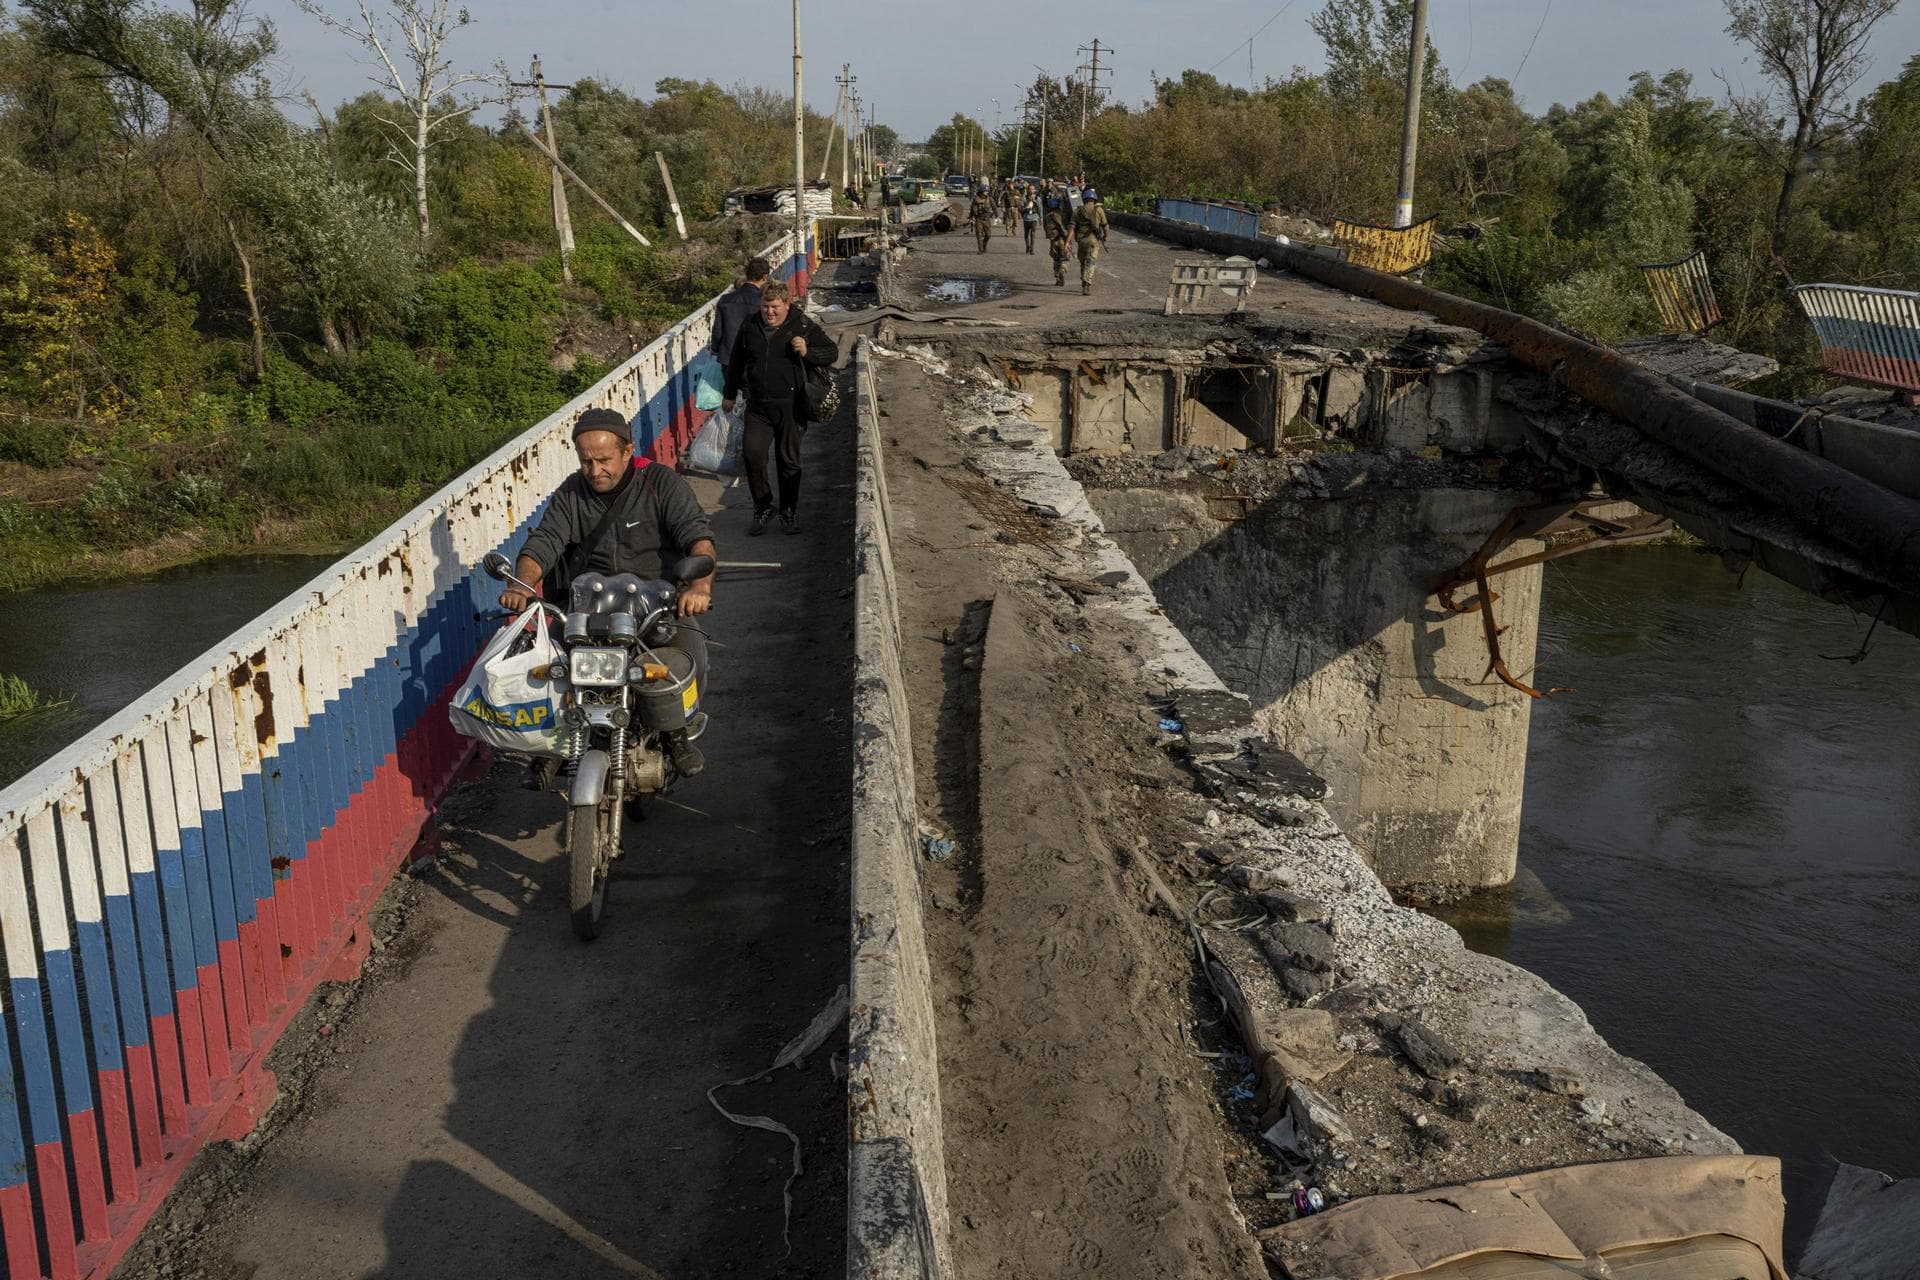 A man drives by motorbike on a destroyed bridge across Oskil river during evacuation in recently liberated town Kupiansk